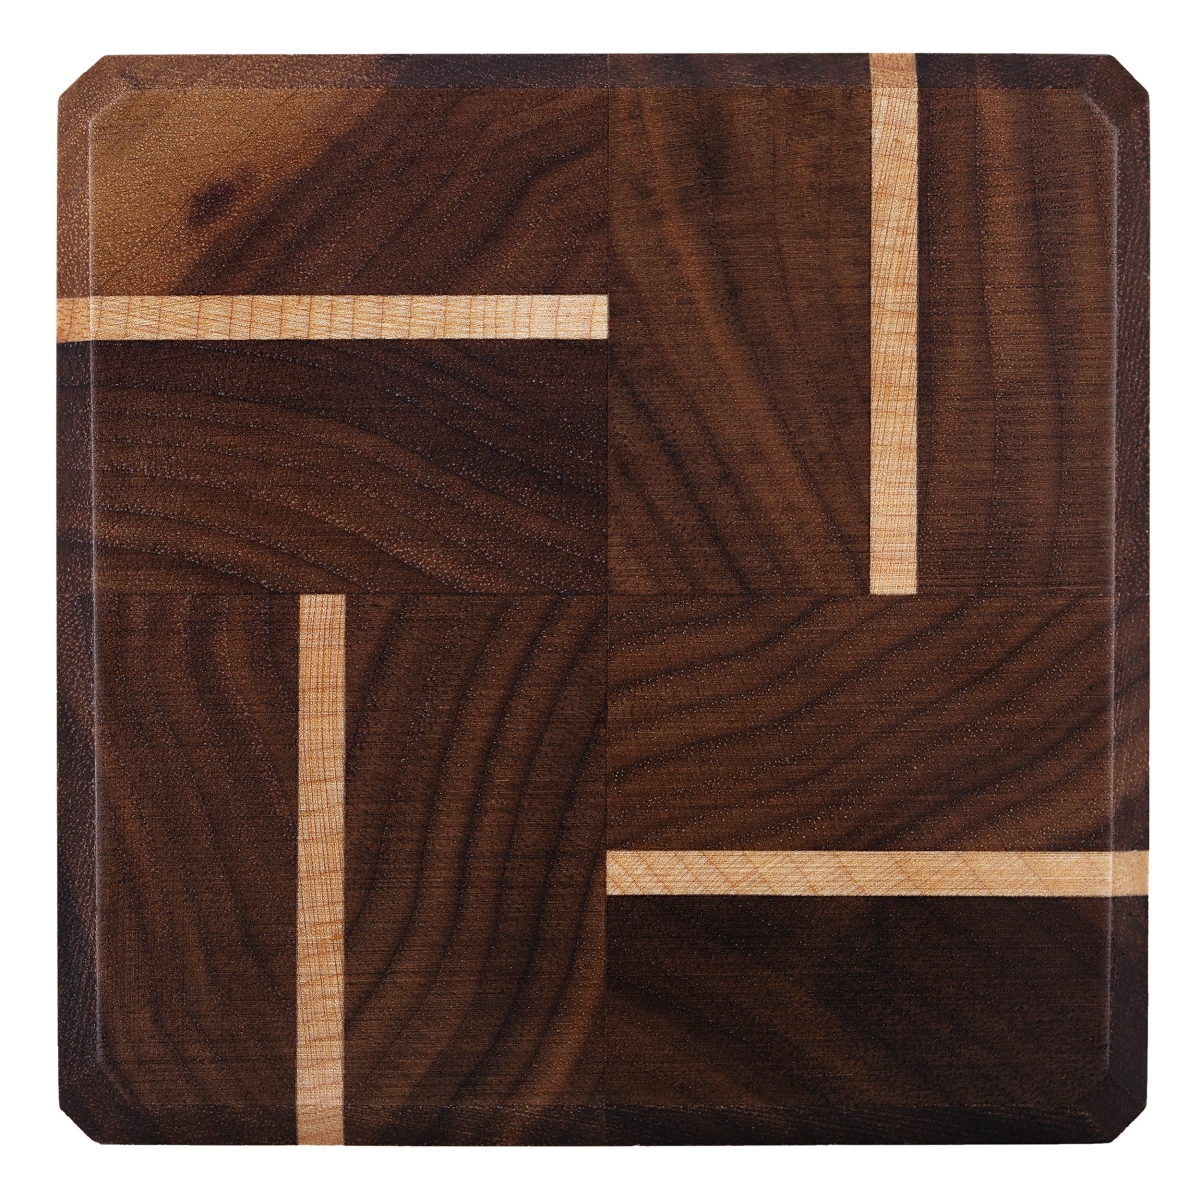 Picture of A & E Millwork AEM-5048 Single Maple & Lace Wood Coasters